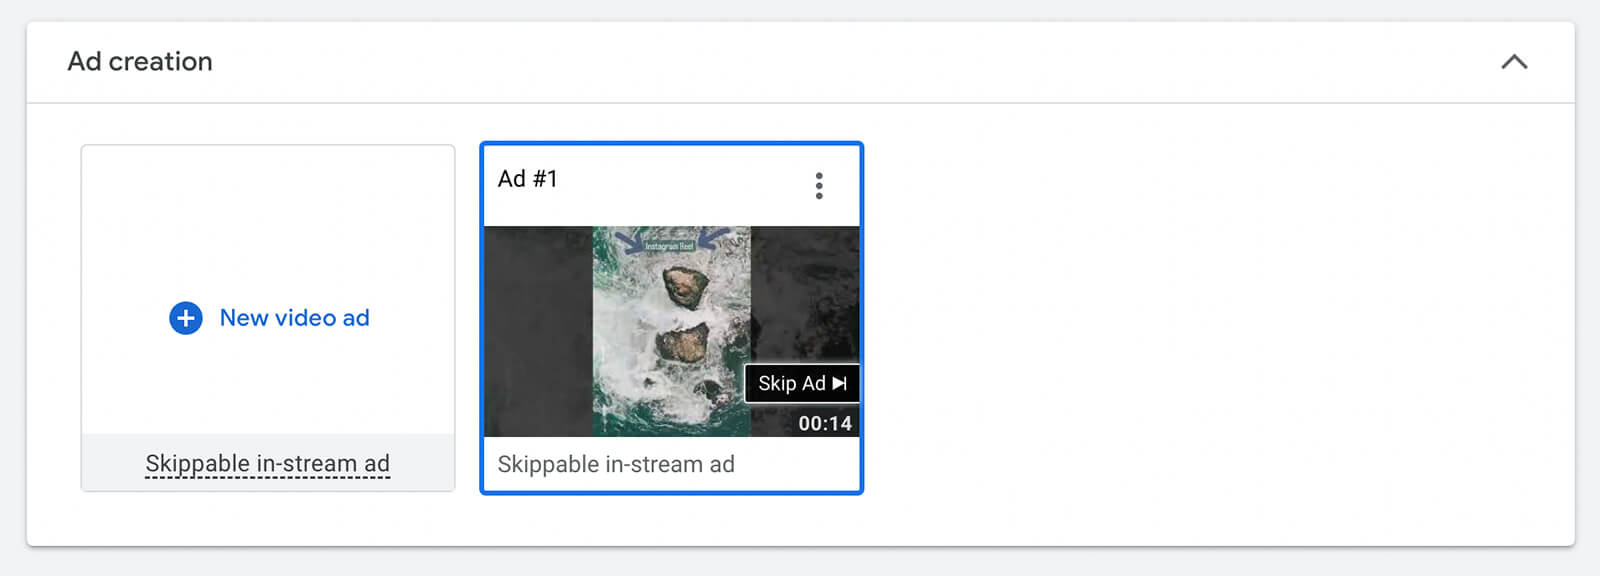 how-to-create-a-video-ad-with-an-existing-short-using-youtube-shorts-ads-include-multiple-ads-in-ad-group-new-video-ad-build-out-ad-creation-example-8